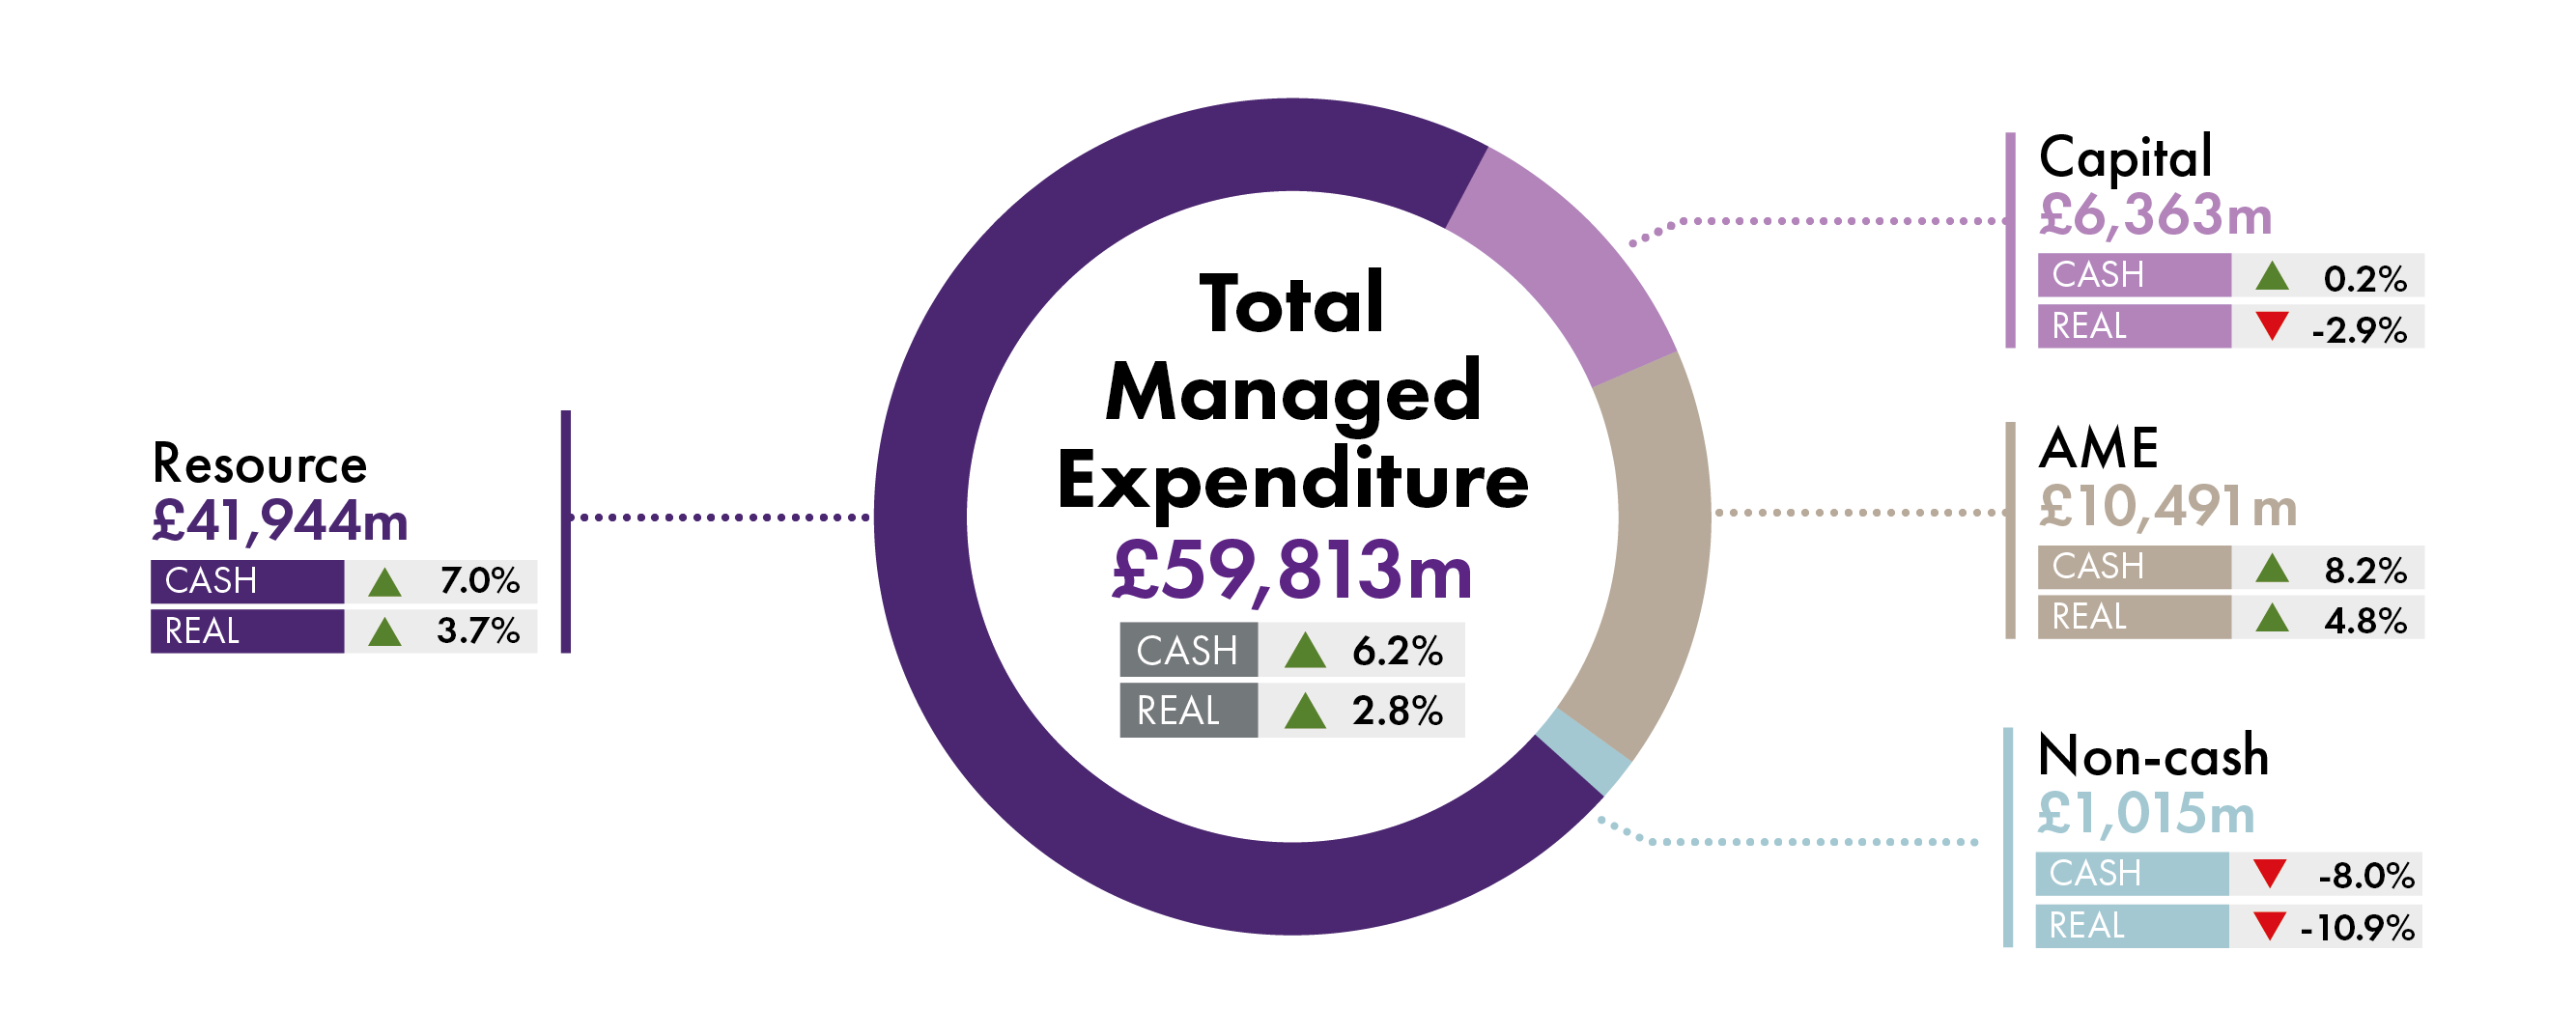 Donut chart showing breakdown of Total Managed Expenditure in the 2023-24 Budget - explanation in the text.